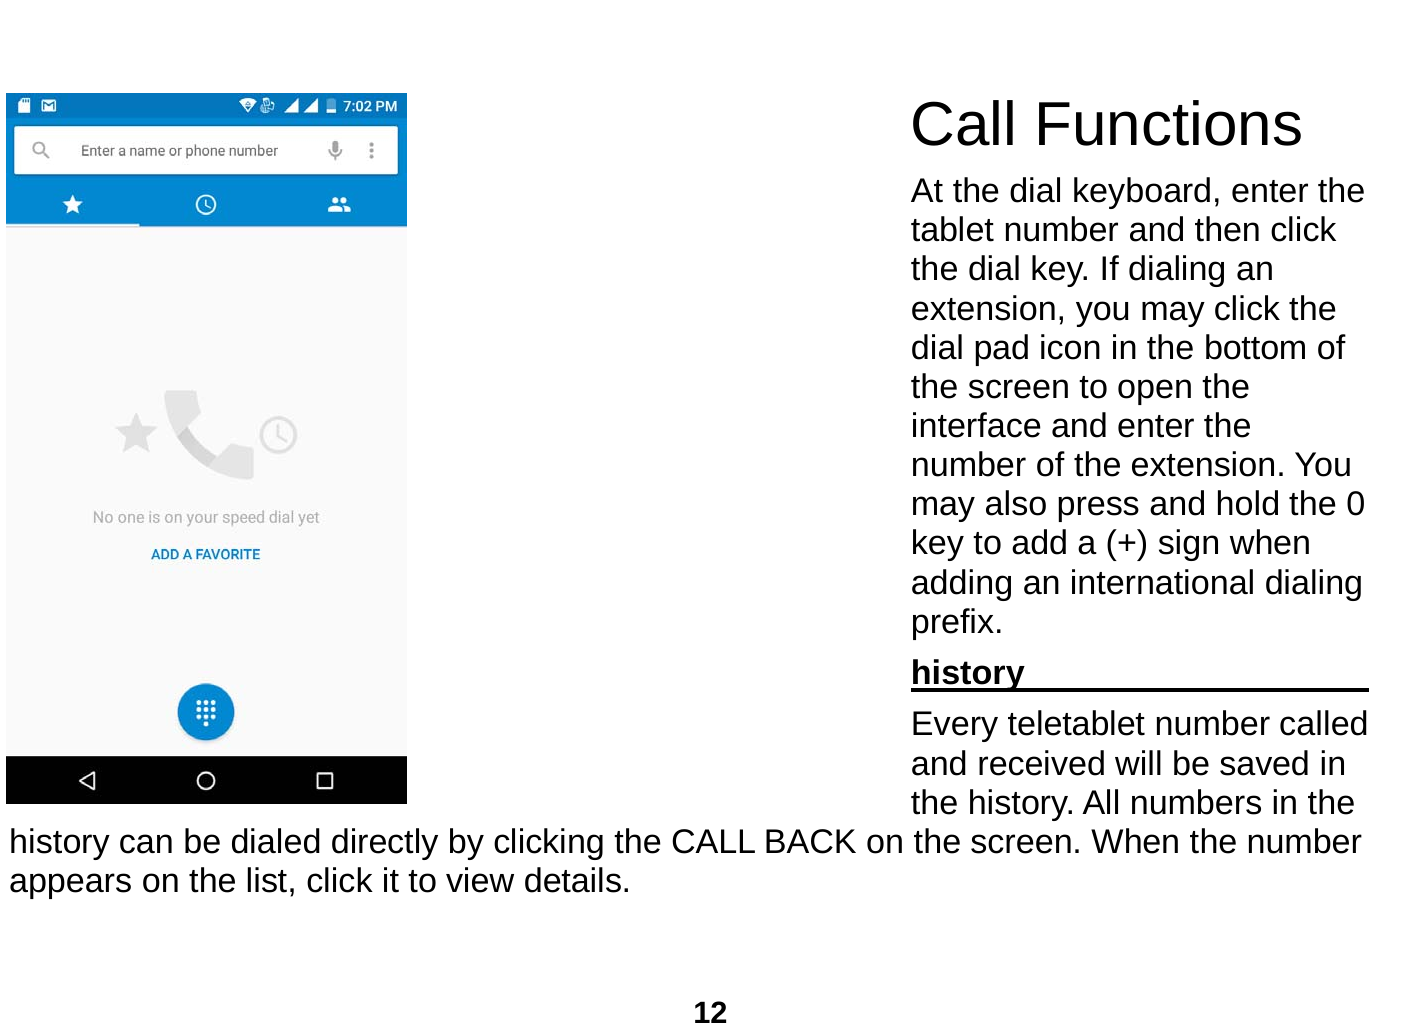  12  Call Functions          At the dial keyboard, enter the tablet number and then click the dial key. If dialing an extension, you may click the dial pad icon in the bottom of the screen to open the interface and enter the number of the extension. You may also press and hold the 0 key to add a (+) sign when adding an international dialing prefix. history                                  Every teletablet number called and received will be saved in the history. All numbers in the history can be dialed directly by clicking the CALL BACK on the screen. When the number appears on the list, click it to view details.   